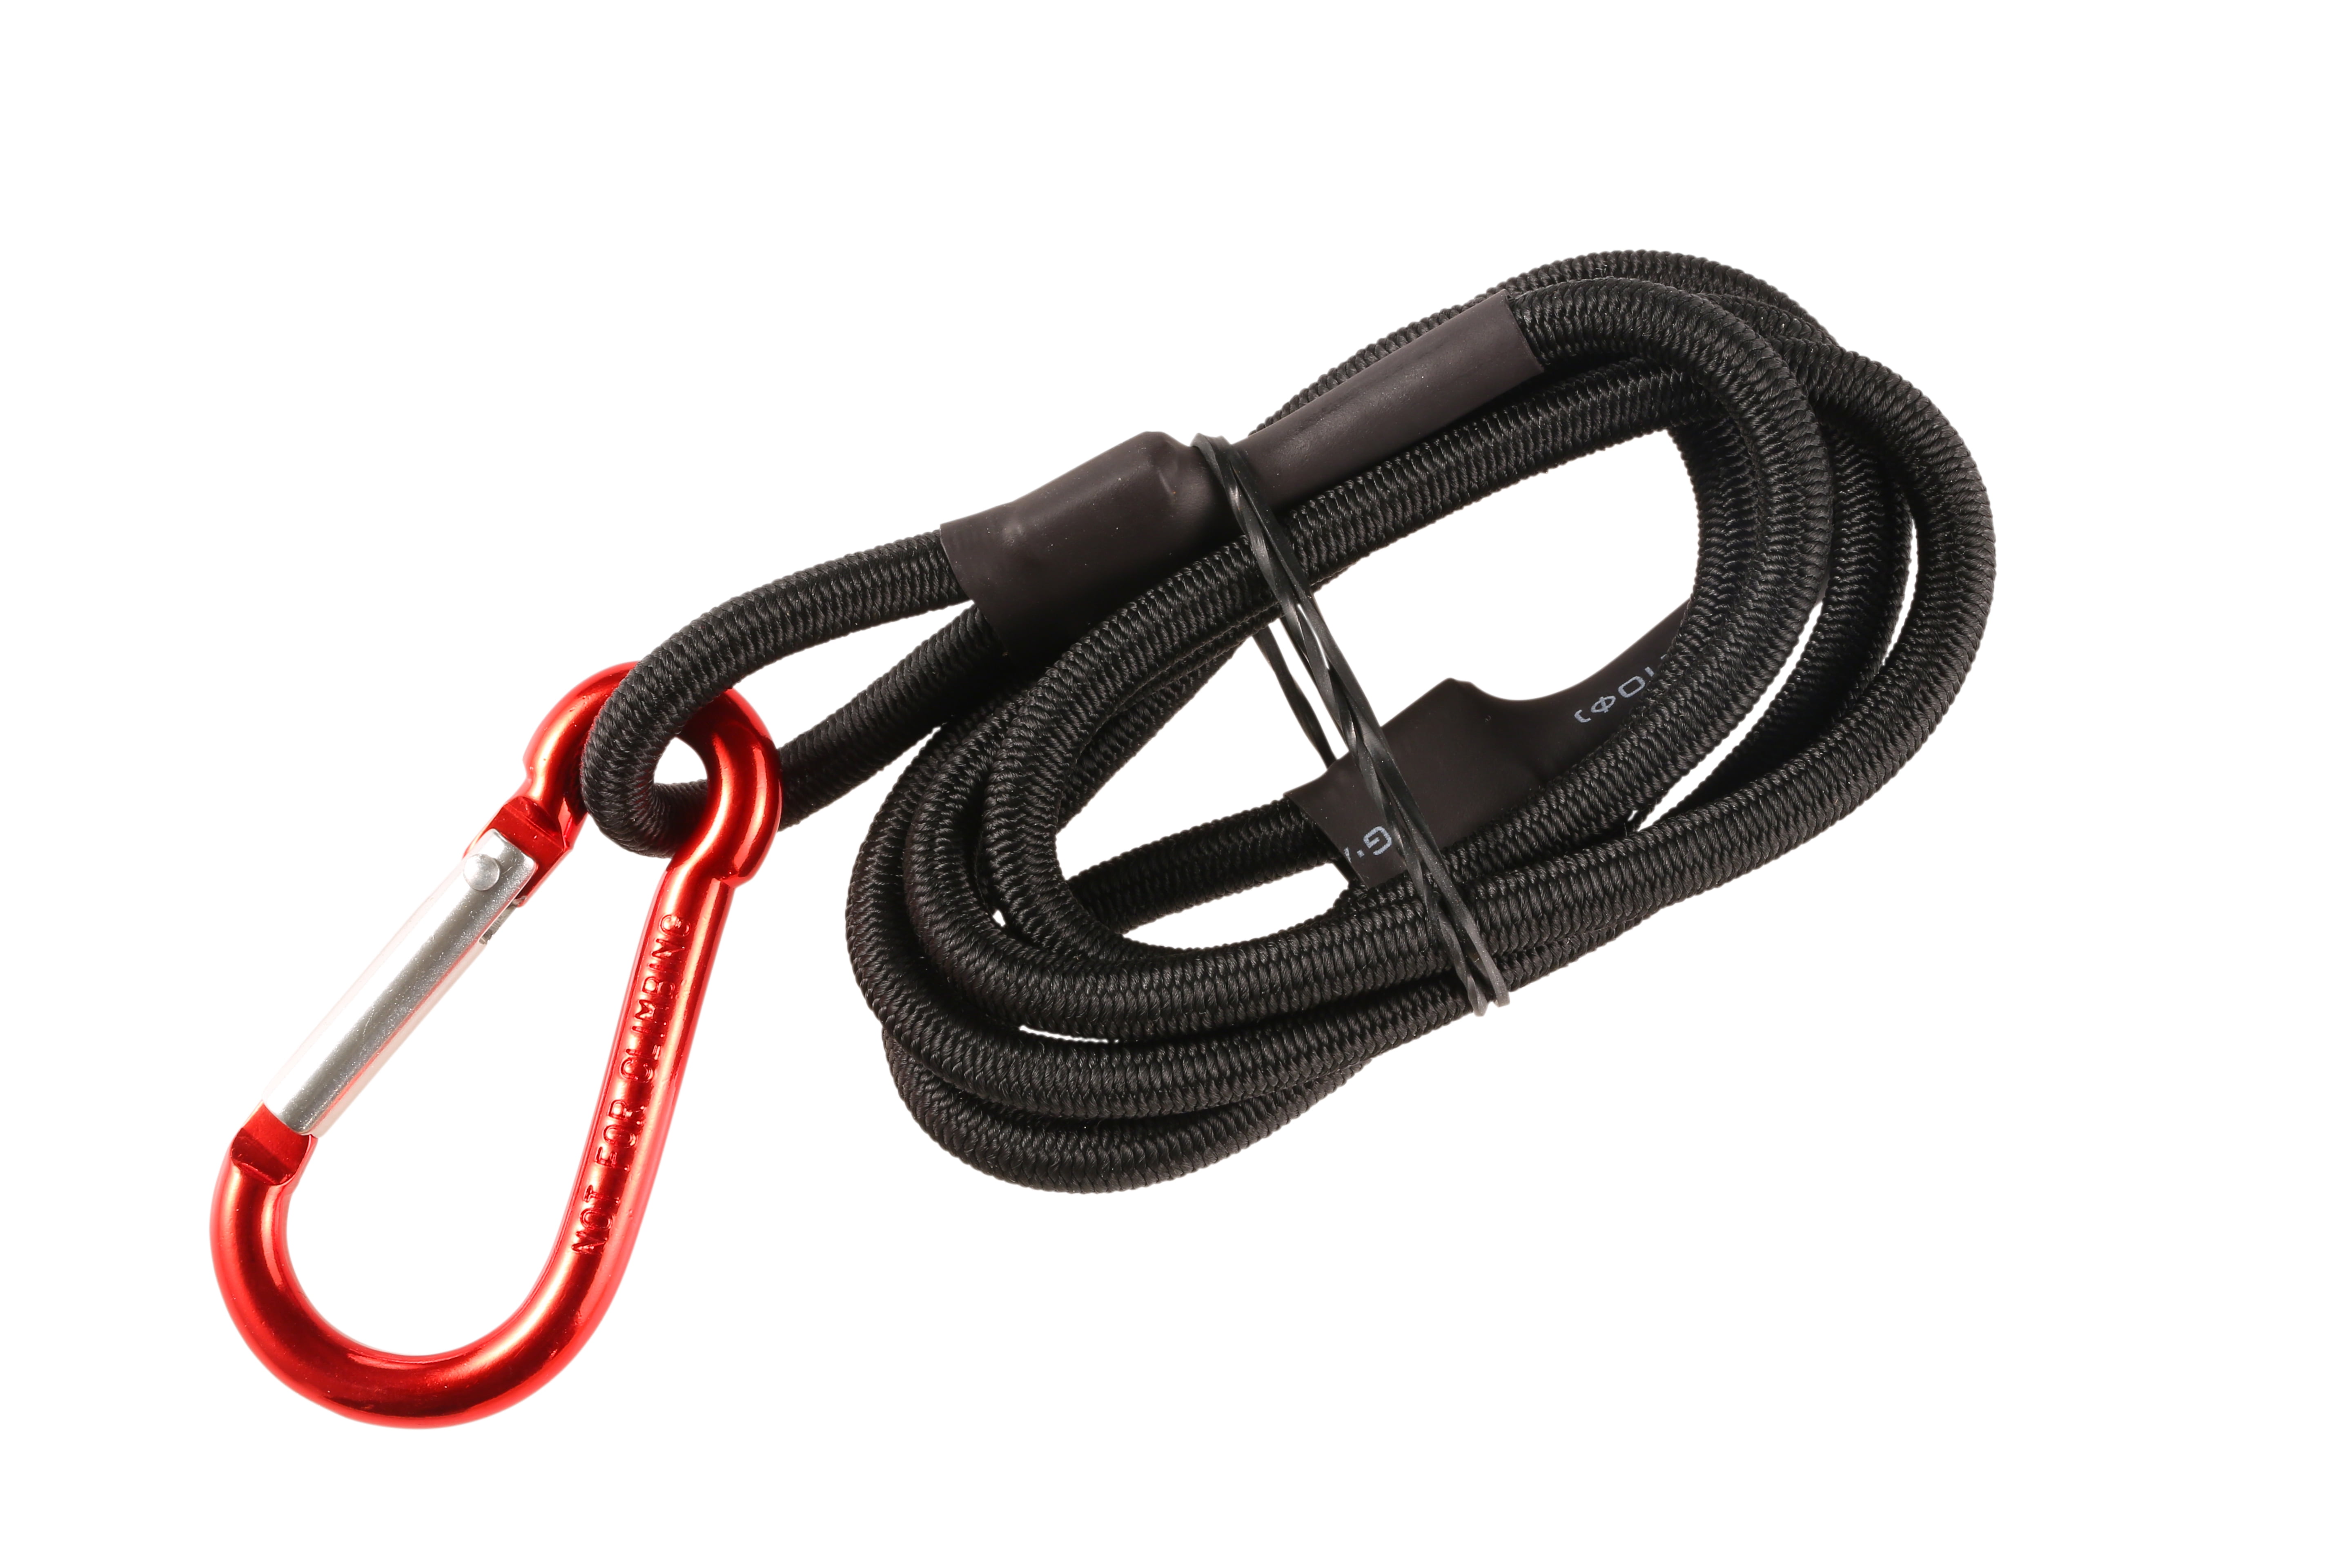 Rod Leash The A Safety Lanyard for Your Valuable Sporting Equipment